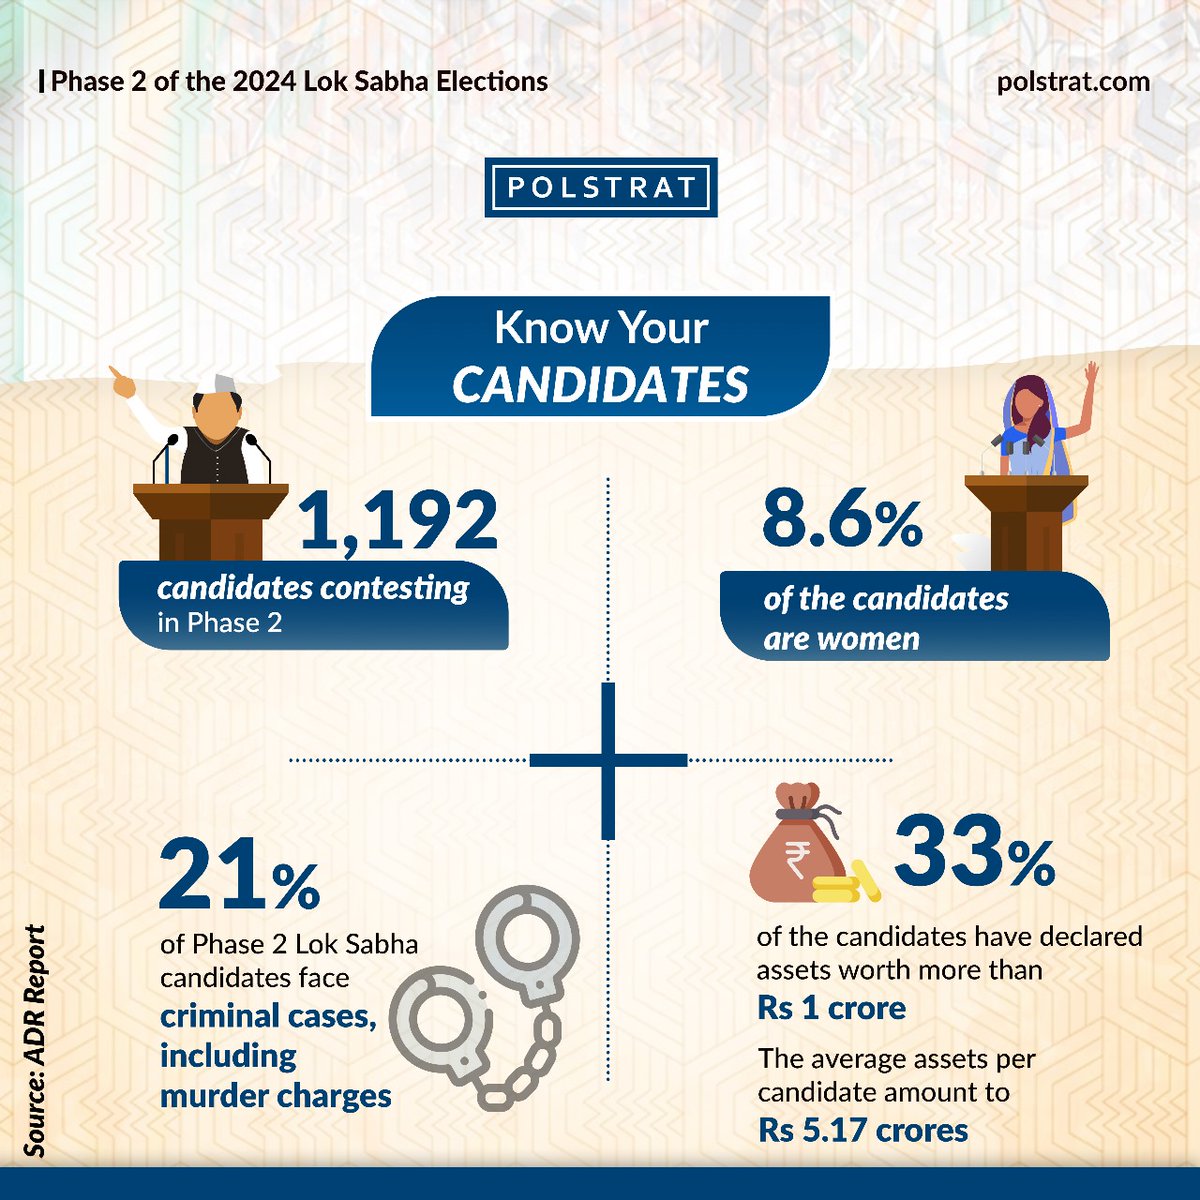 Ahead of the #loksabhaelection2024, #Polstrat explores the constituencies going to the polls in #phase2 and how they fared in the #2019loksabhaelections.

#LokSabhaElection2024 #IndianElections #BJP #Congress #INDIA #NDA #INDIAlliance #Parliament #Loksabha #ElectionInsights